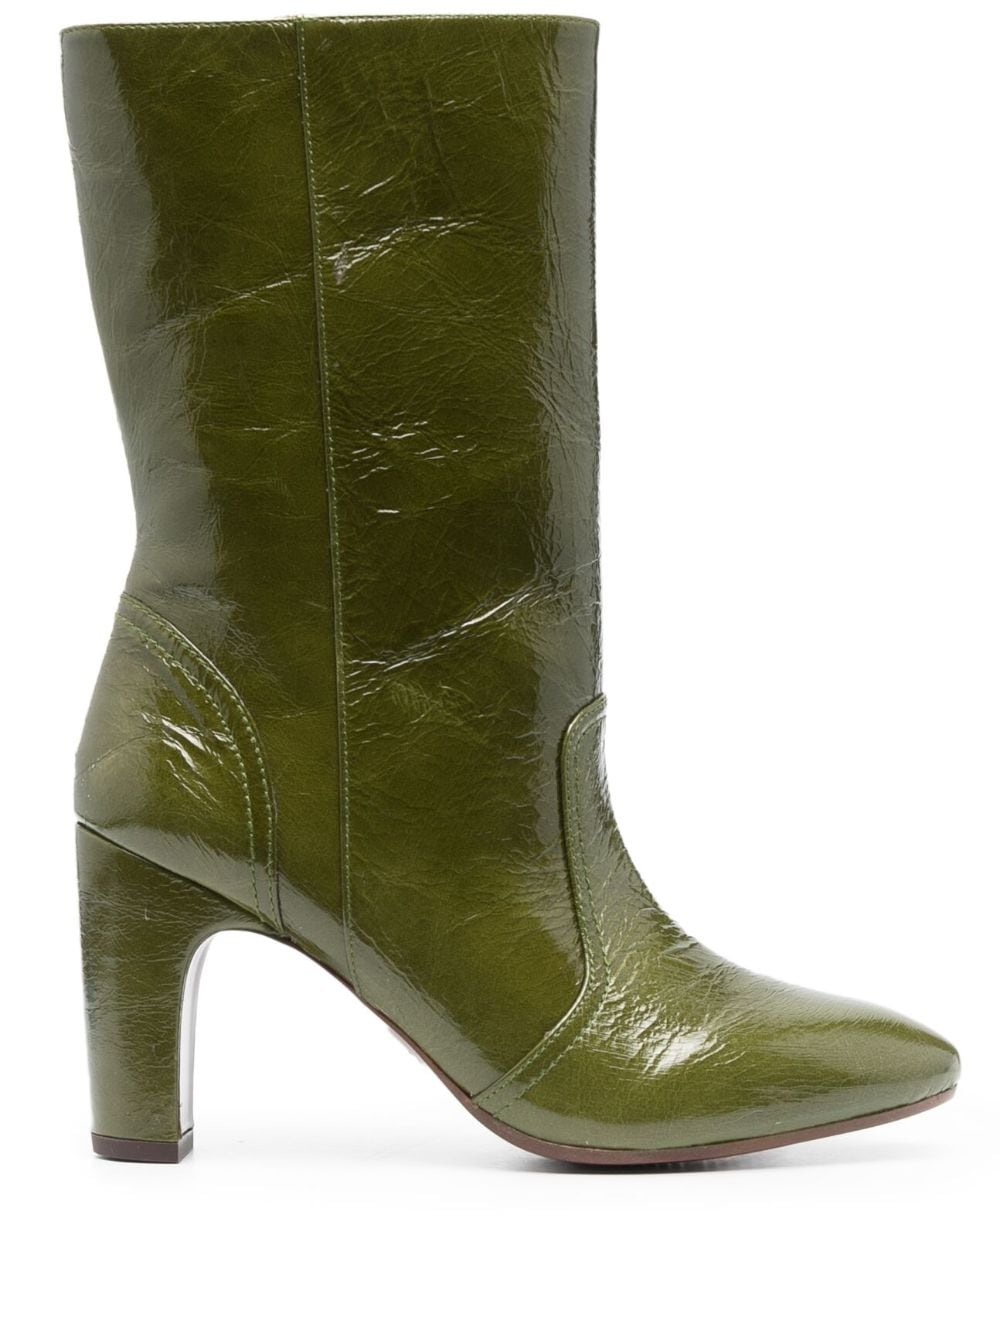 Eyta 85mm leather boots